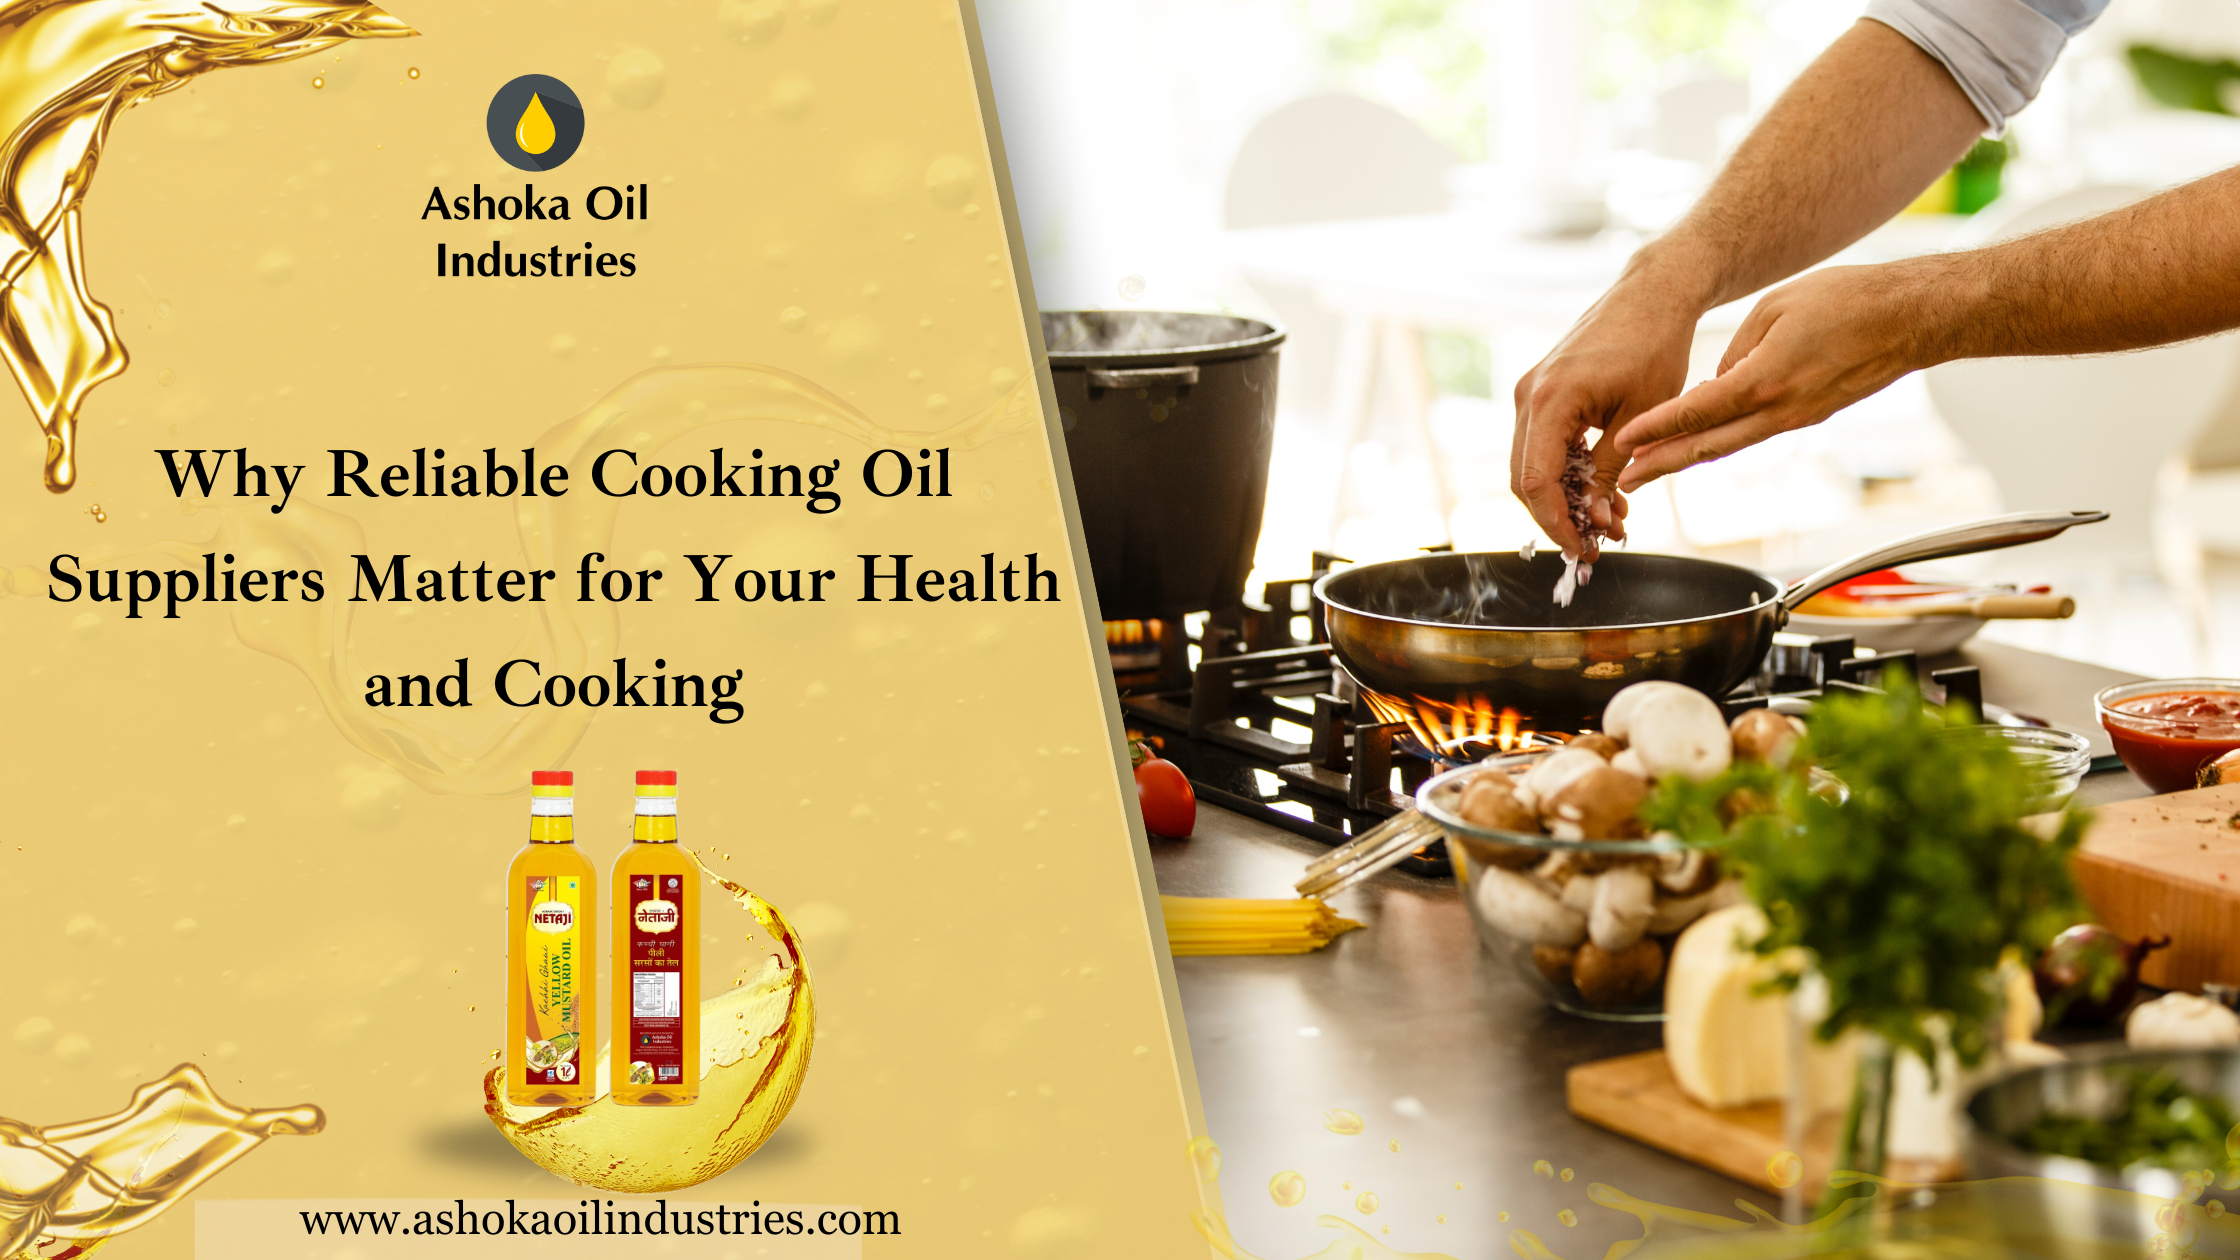 Why Reliable Cooking Oil Suppliers Matter for Your Health and Cooking